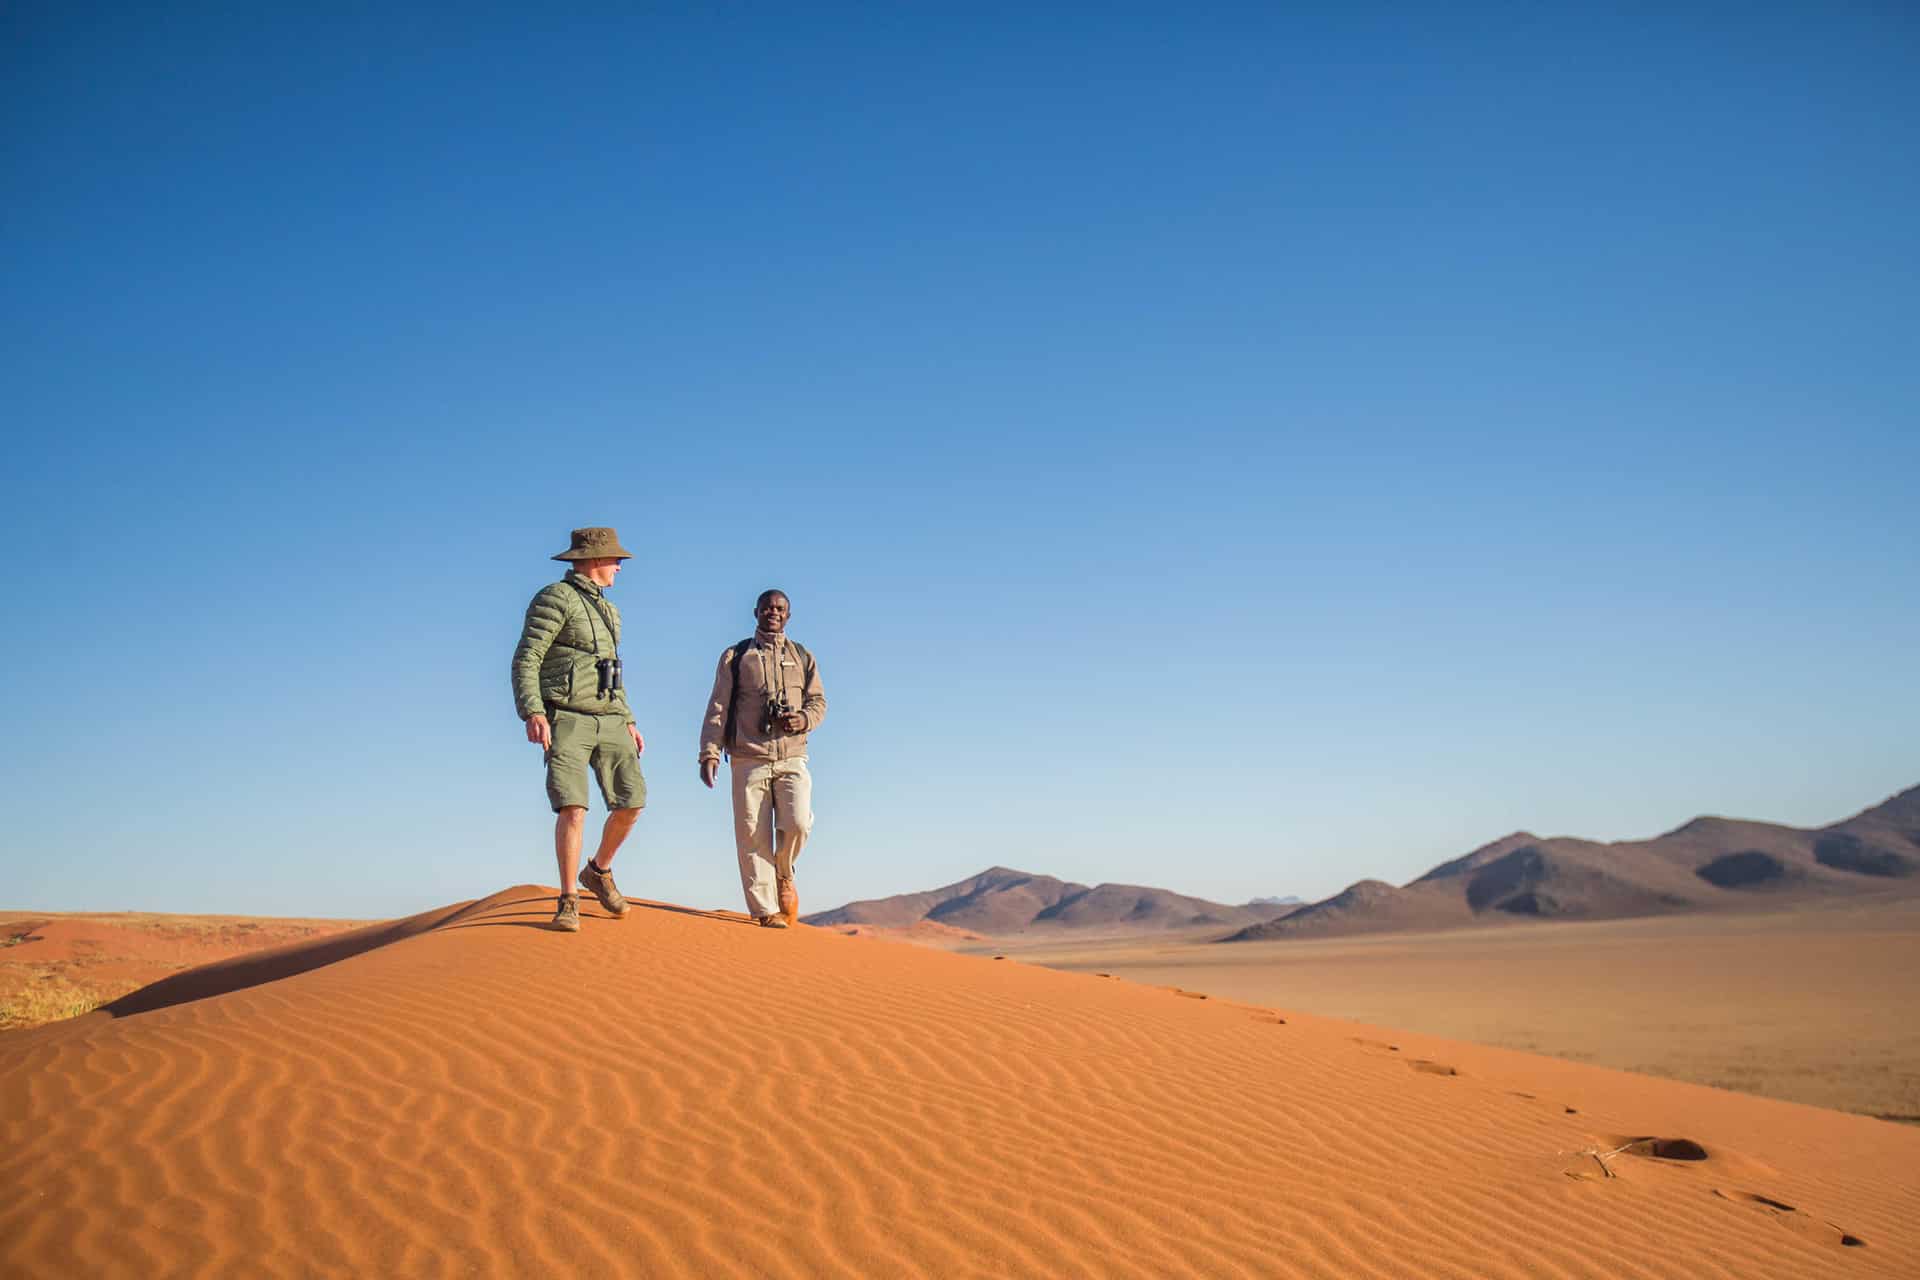 Specialist led walk through the dunes in Namibia, good for solo travelers